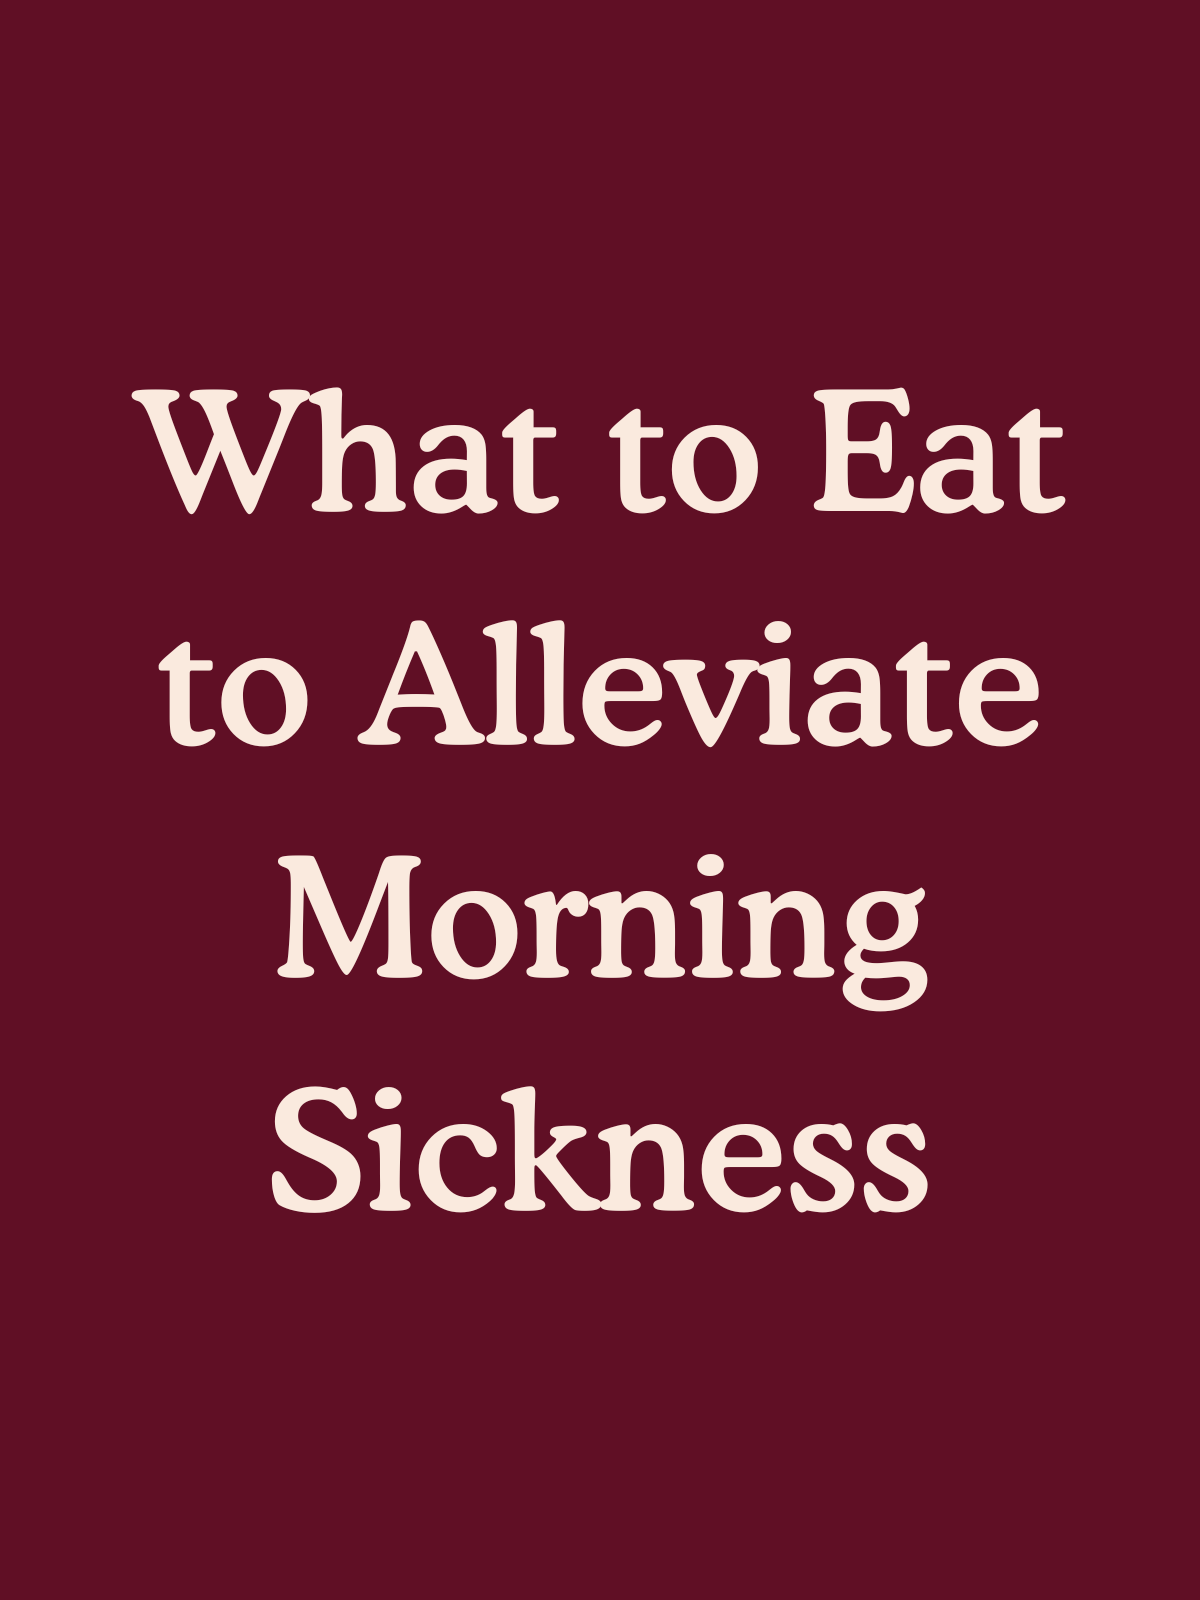 What to Eat to Alleviate Morning Sickness